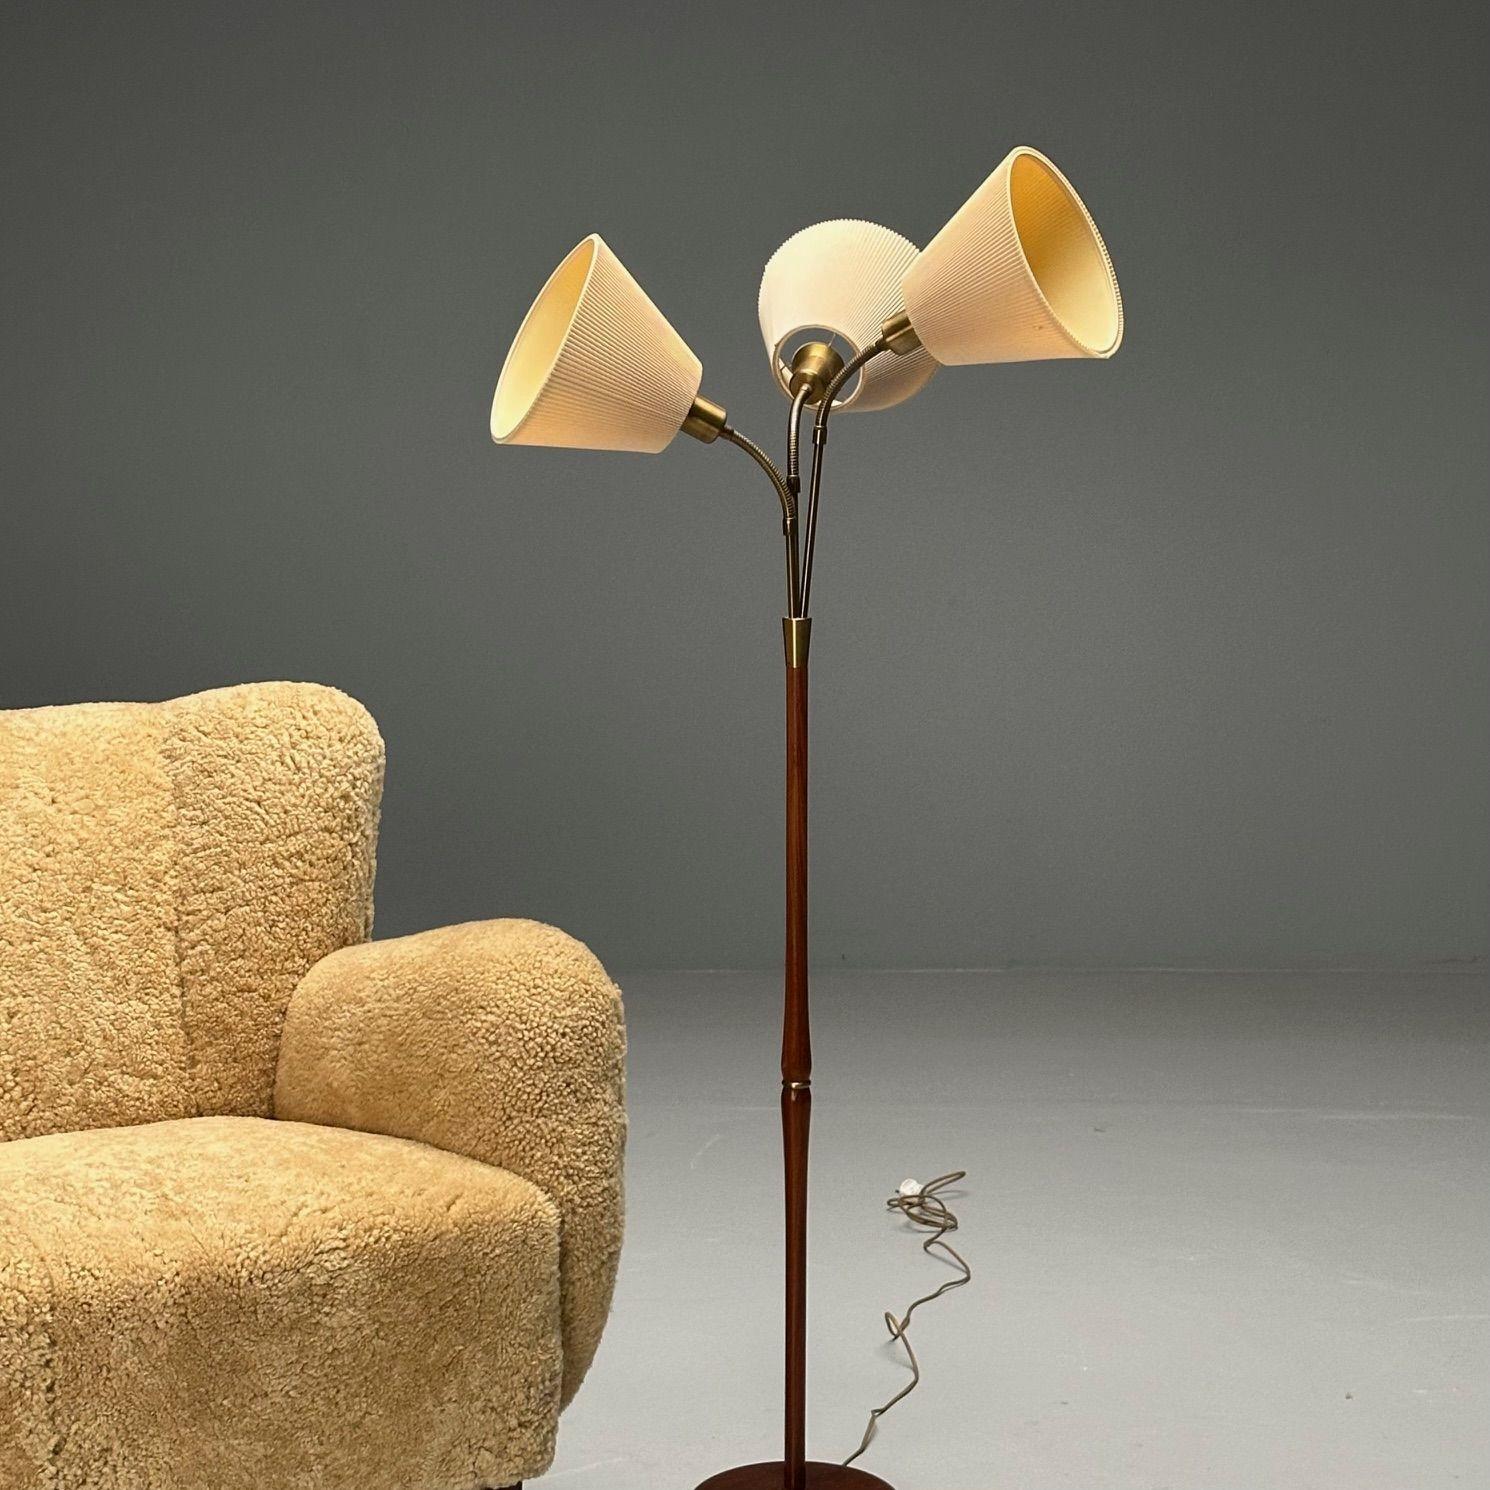 Nybro Armaturfabrik, Swedish Mid-Century Modern, Floor Lamp, Teak, Brass, 1950s

Swedish modern floor lamp designed and produced by Nybro Armaturfabrik NAF in Sweden in the middle of the 20th century. This example features three original adjustable